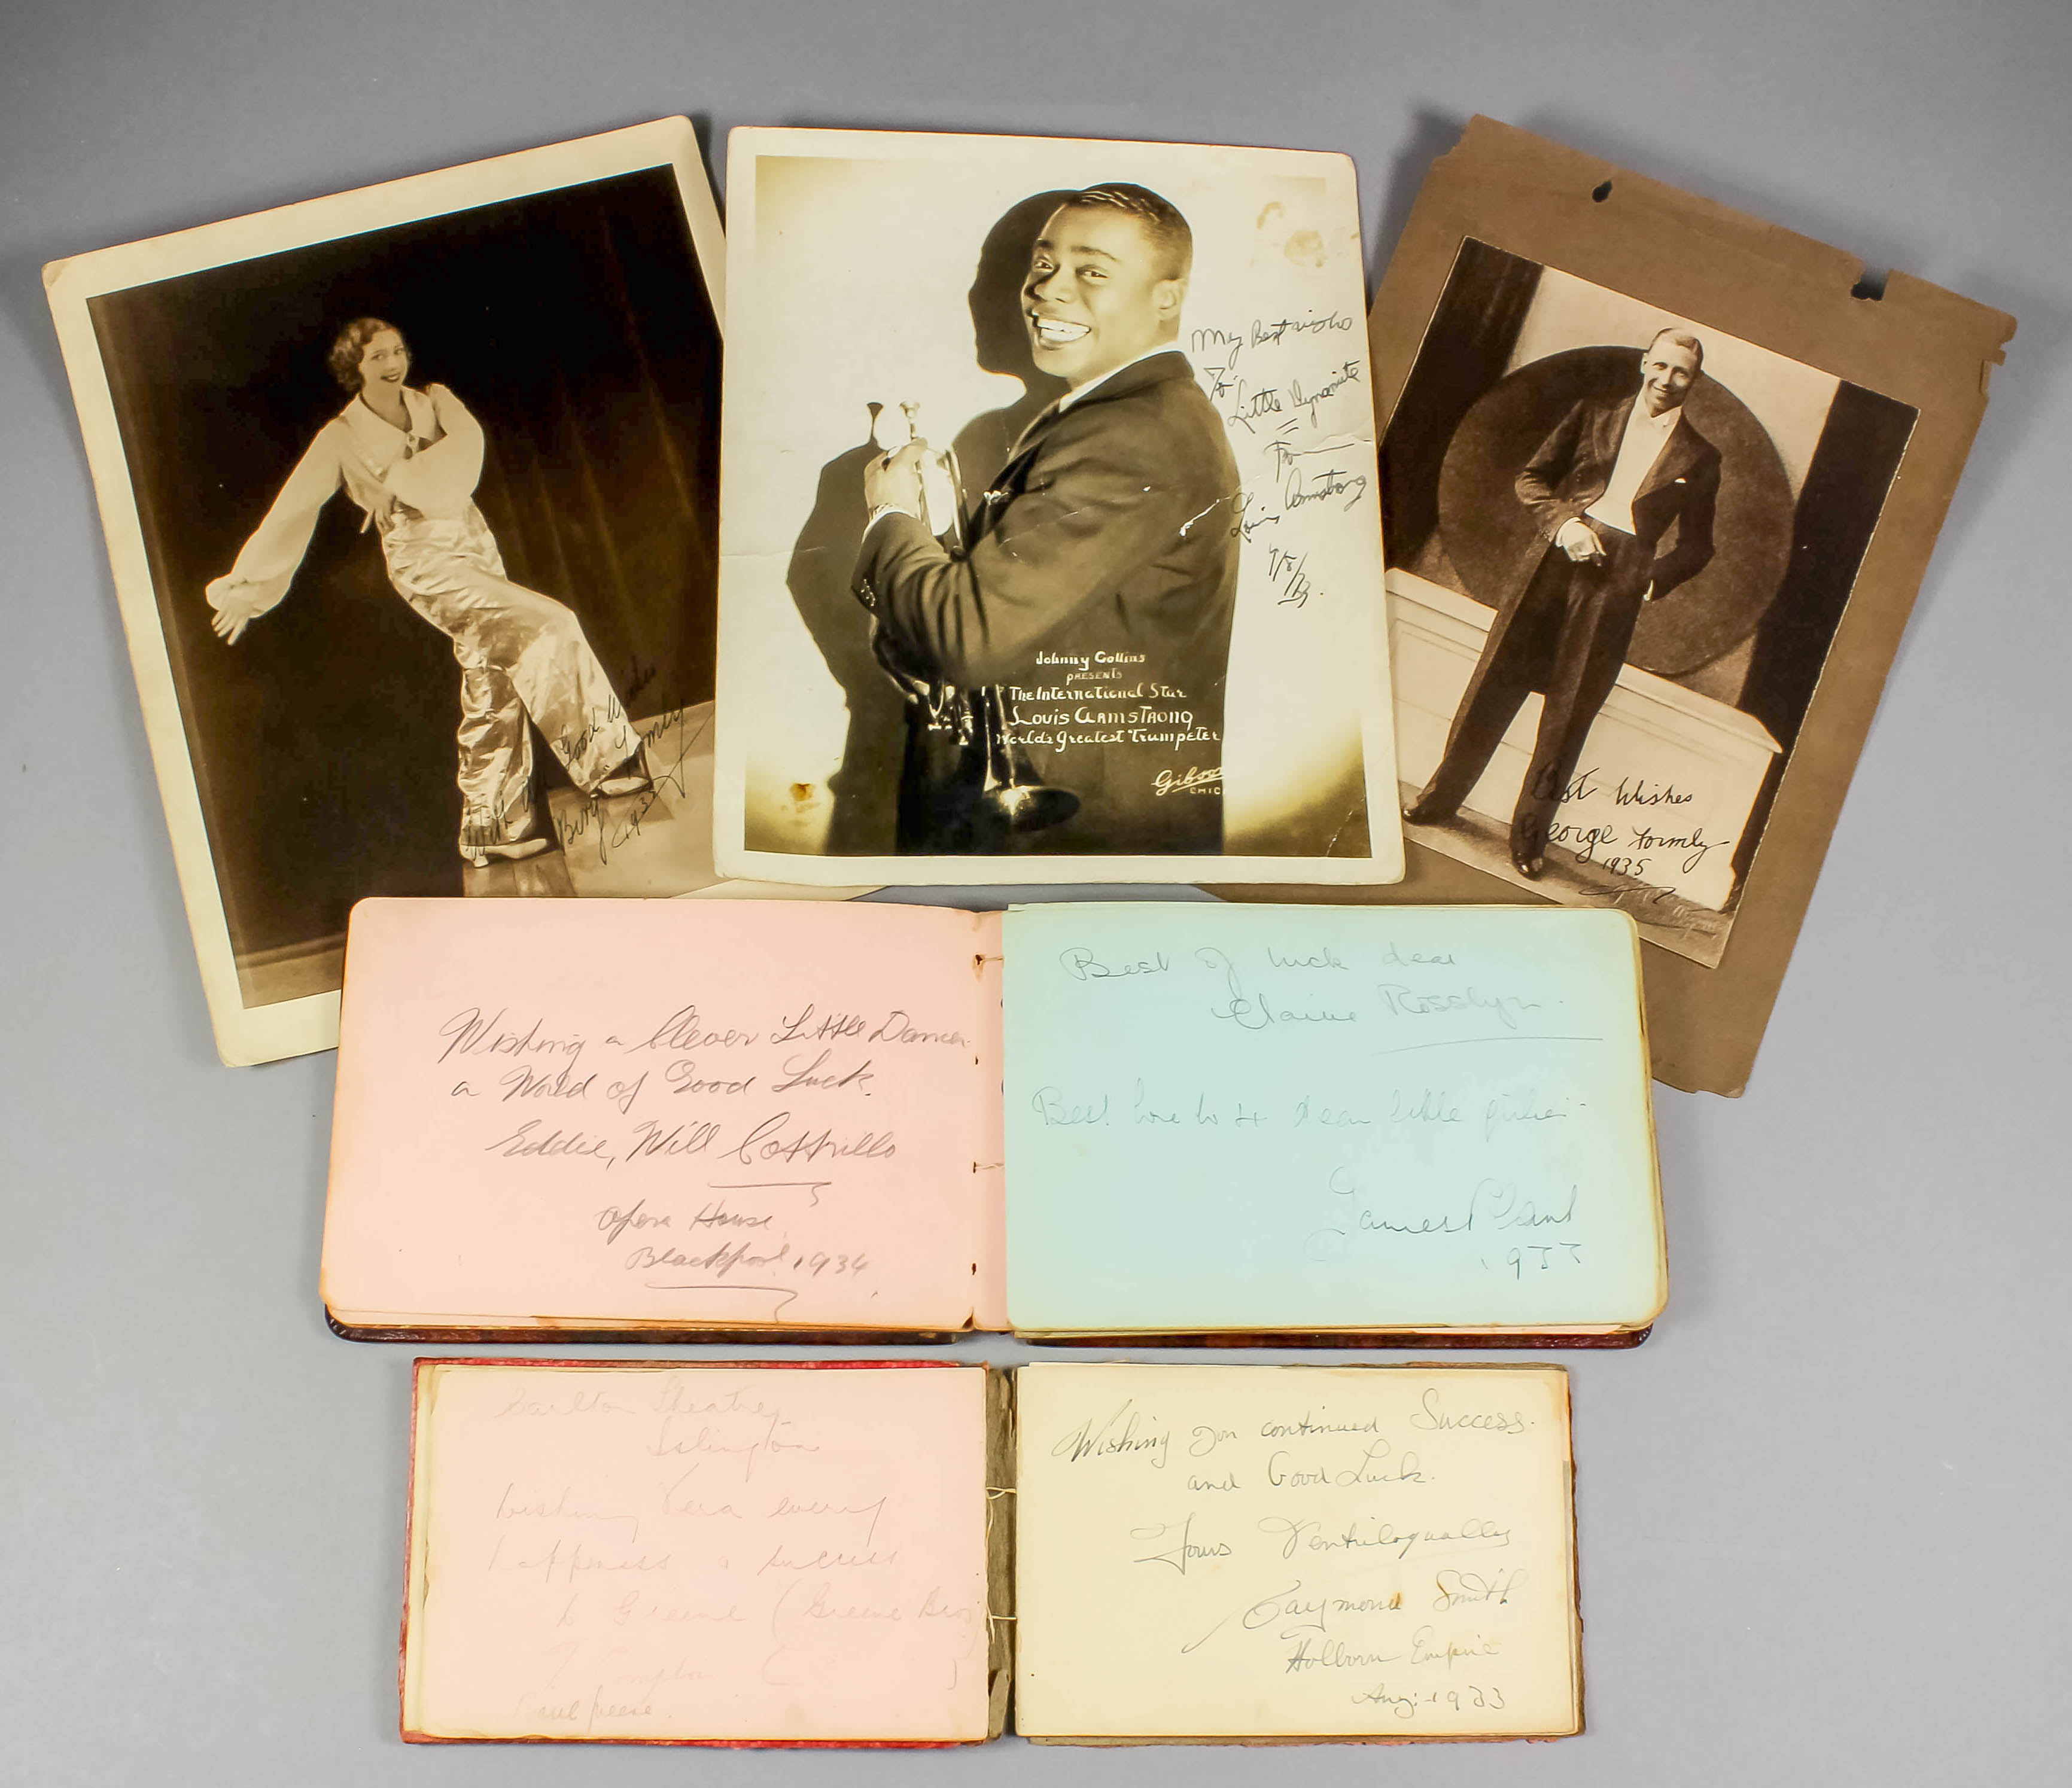 A collection of autographs from musicians and theatre acts, including - Louis Armstrong (1901-